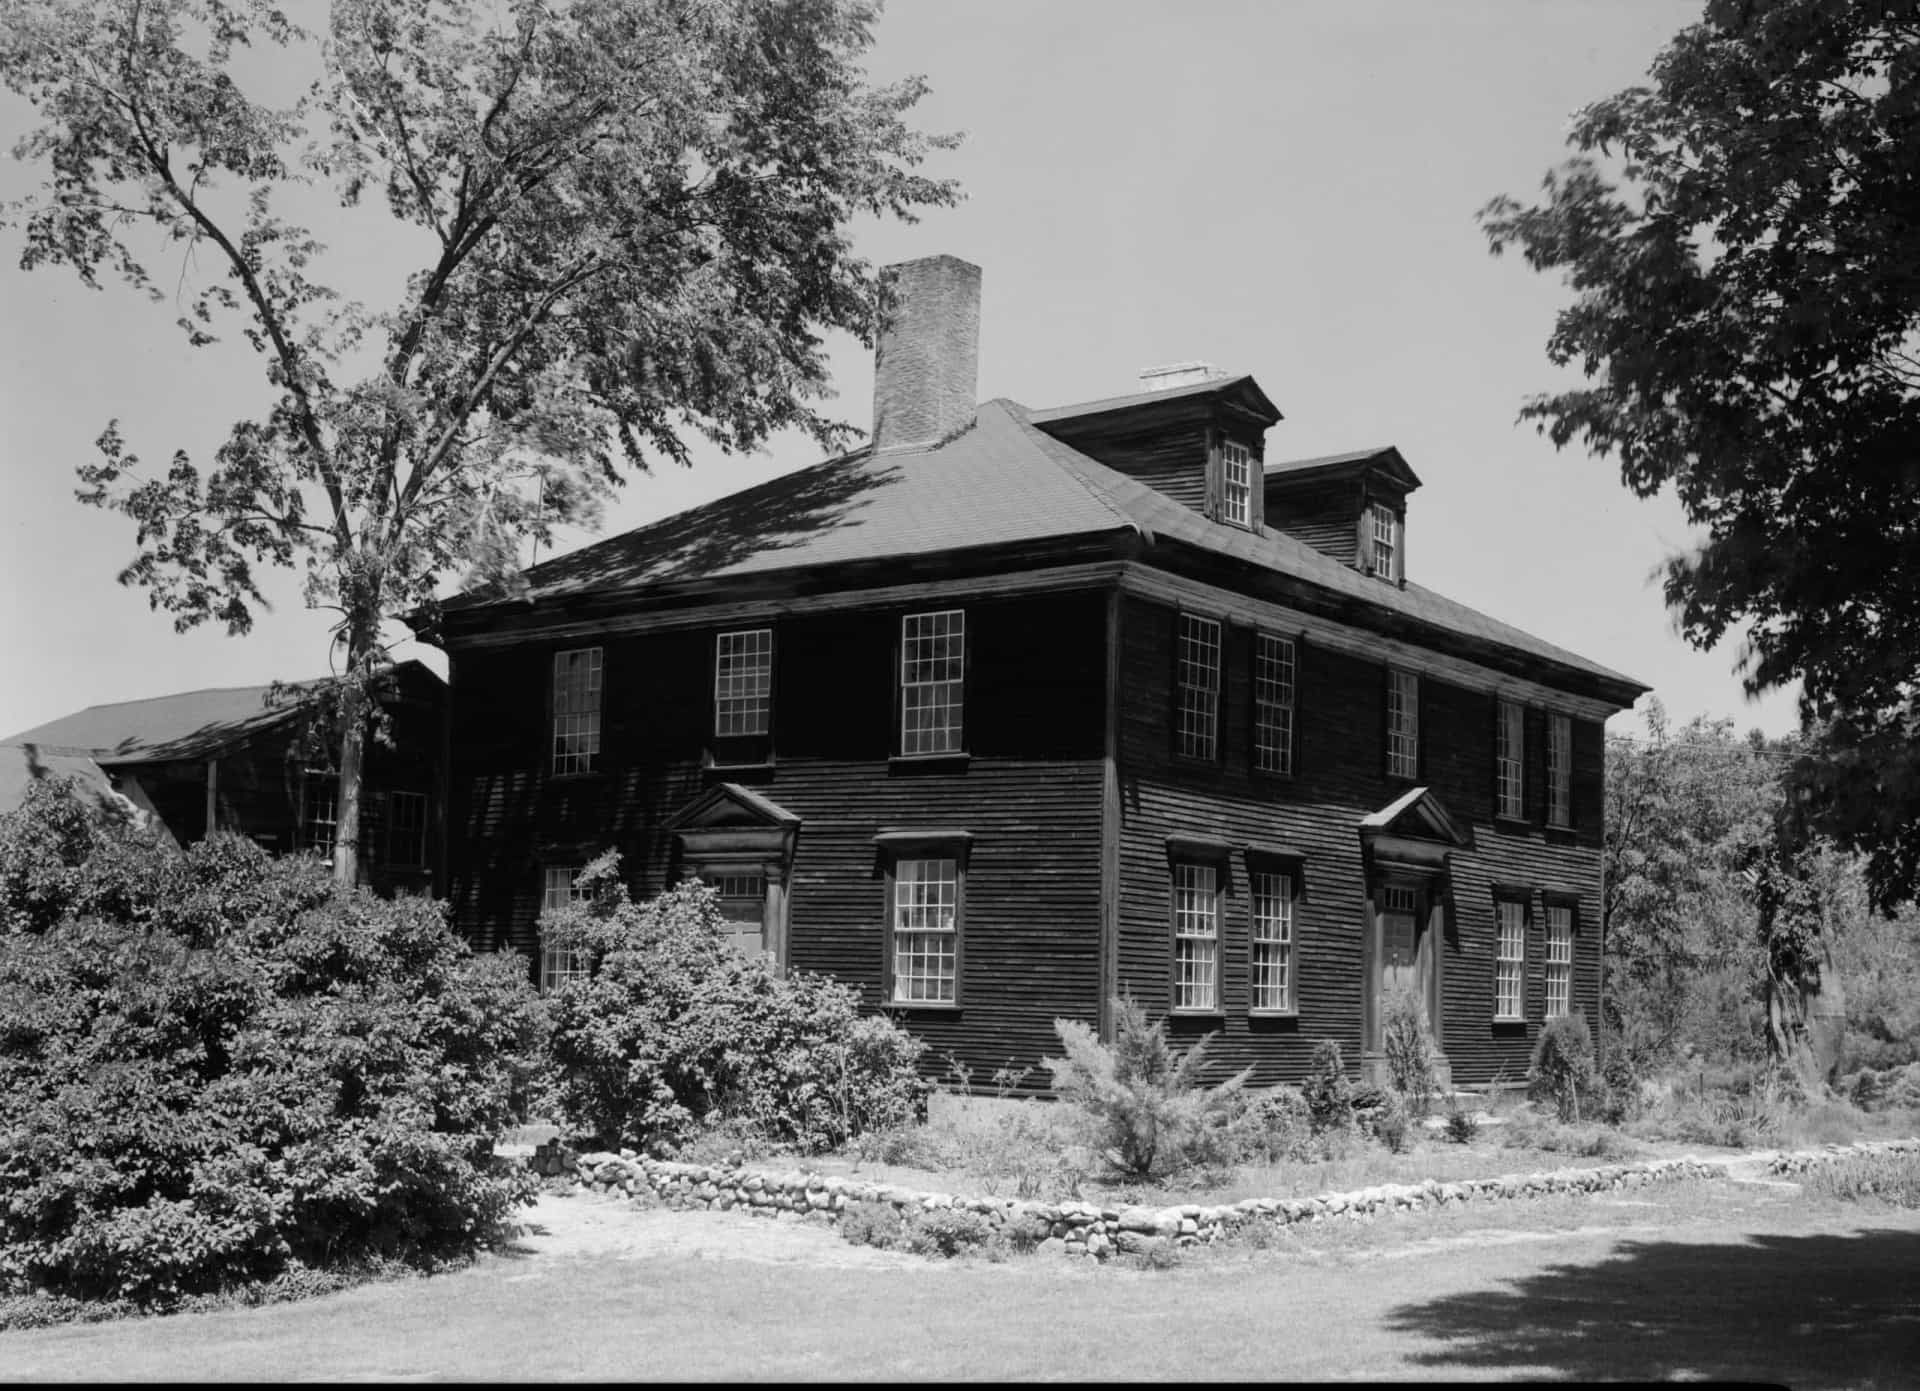 <p>Mary Wallace was born in 1720 aboard a ship headed to America. Mary grew up and settled in Henniker, New Hampshire. Her ghost is said to haunt the Ocean Born Mary house (as it became known), where an apparition of Mary in her rocking chair was common. </p>